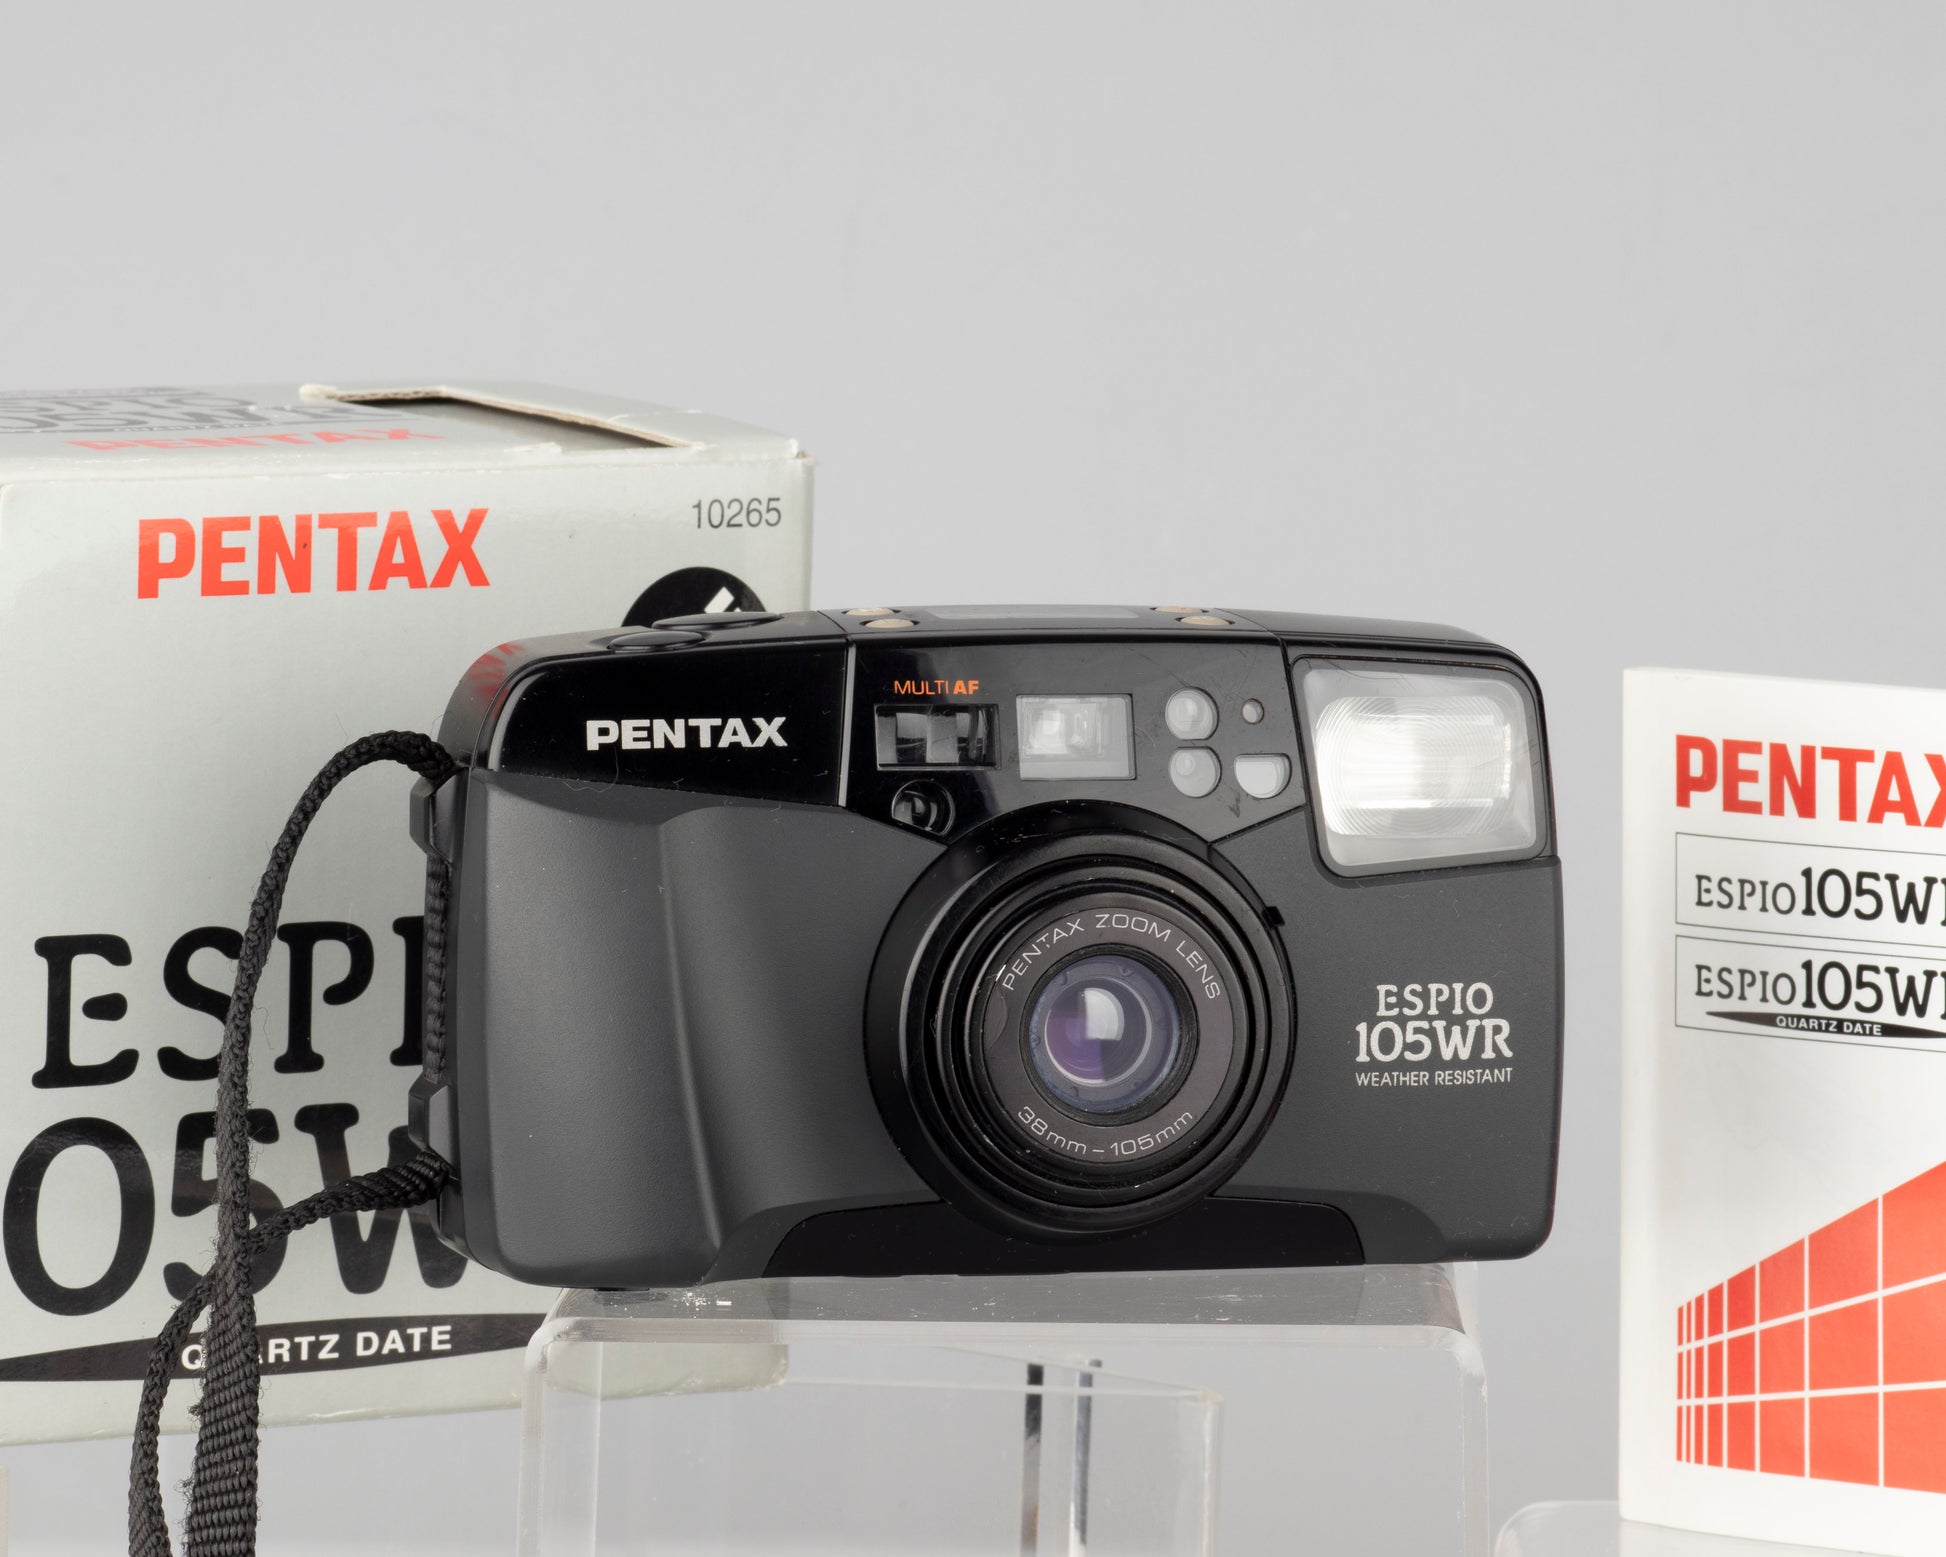 The Pentax Espio 105WR (aka Pentax IQZoom 105WR) is a high quality weather-resistant 35mm camera from the late 1990s